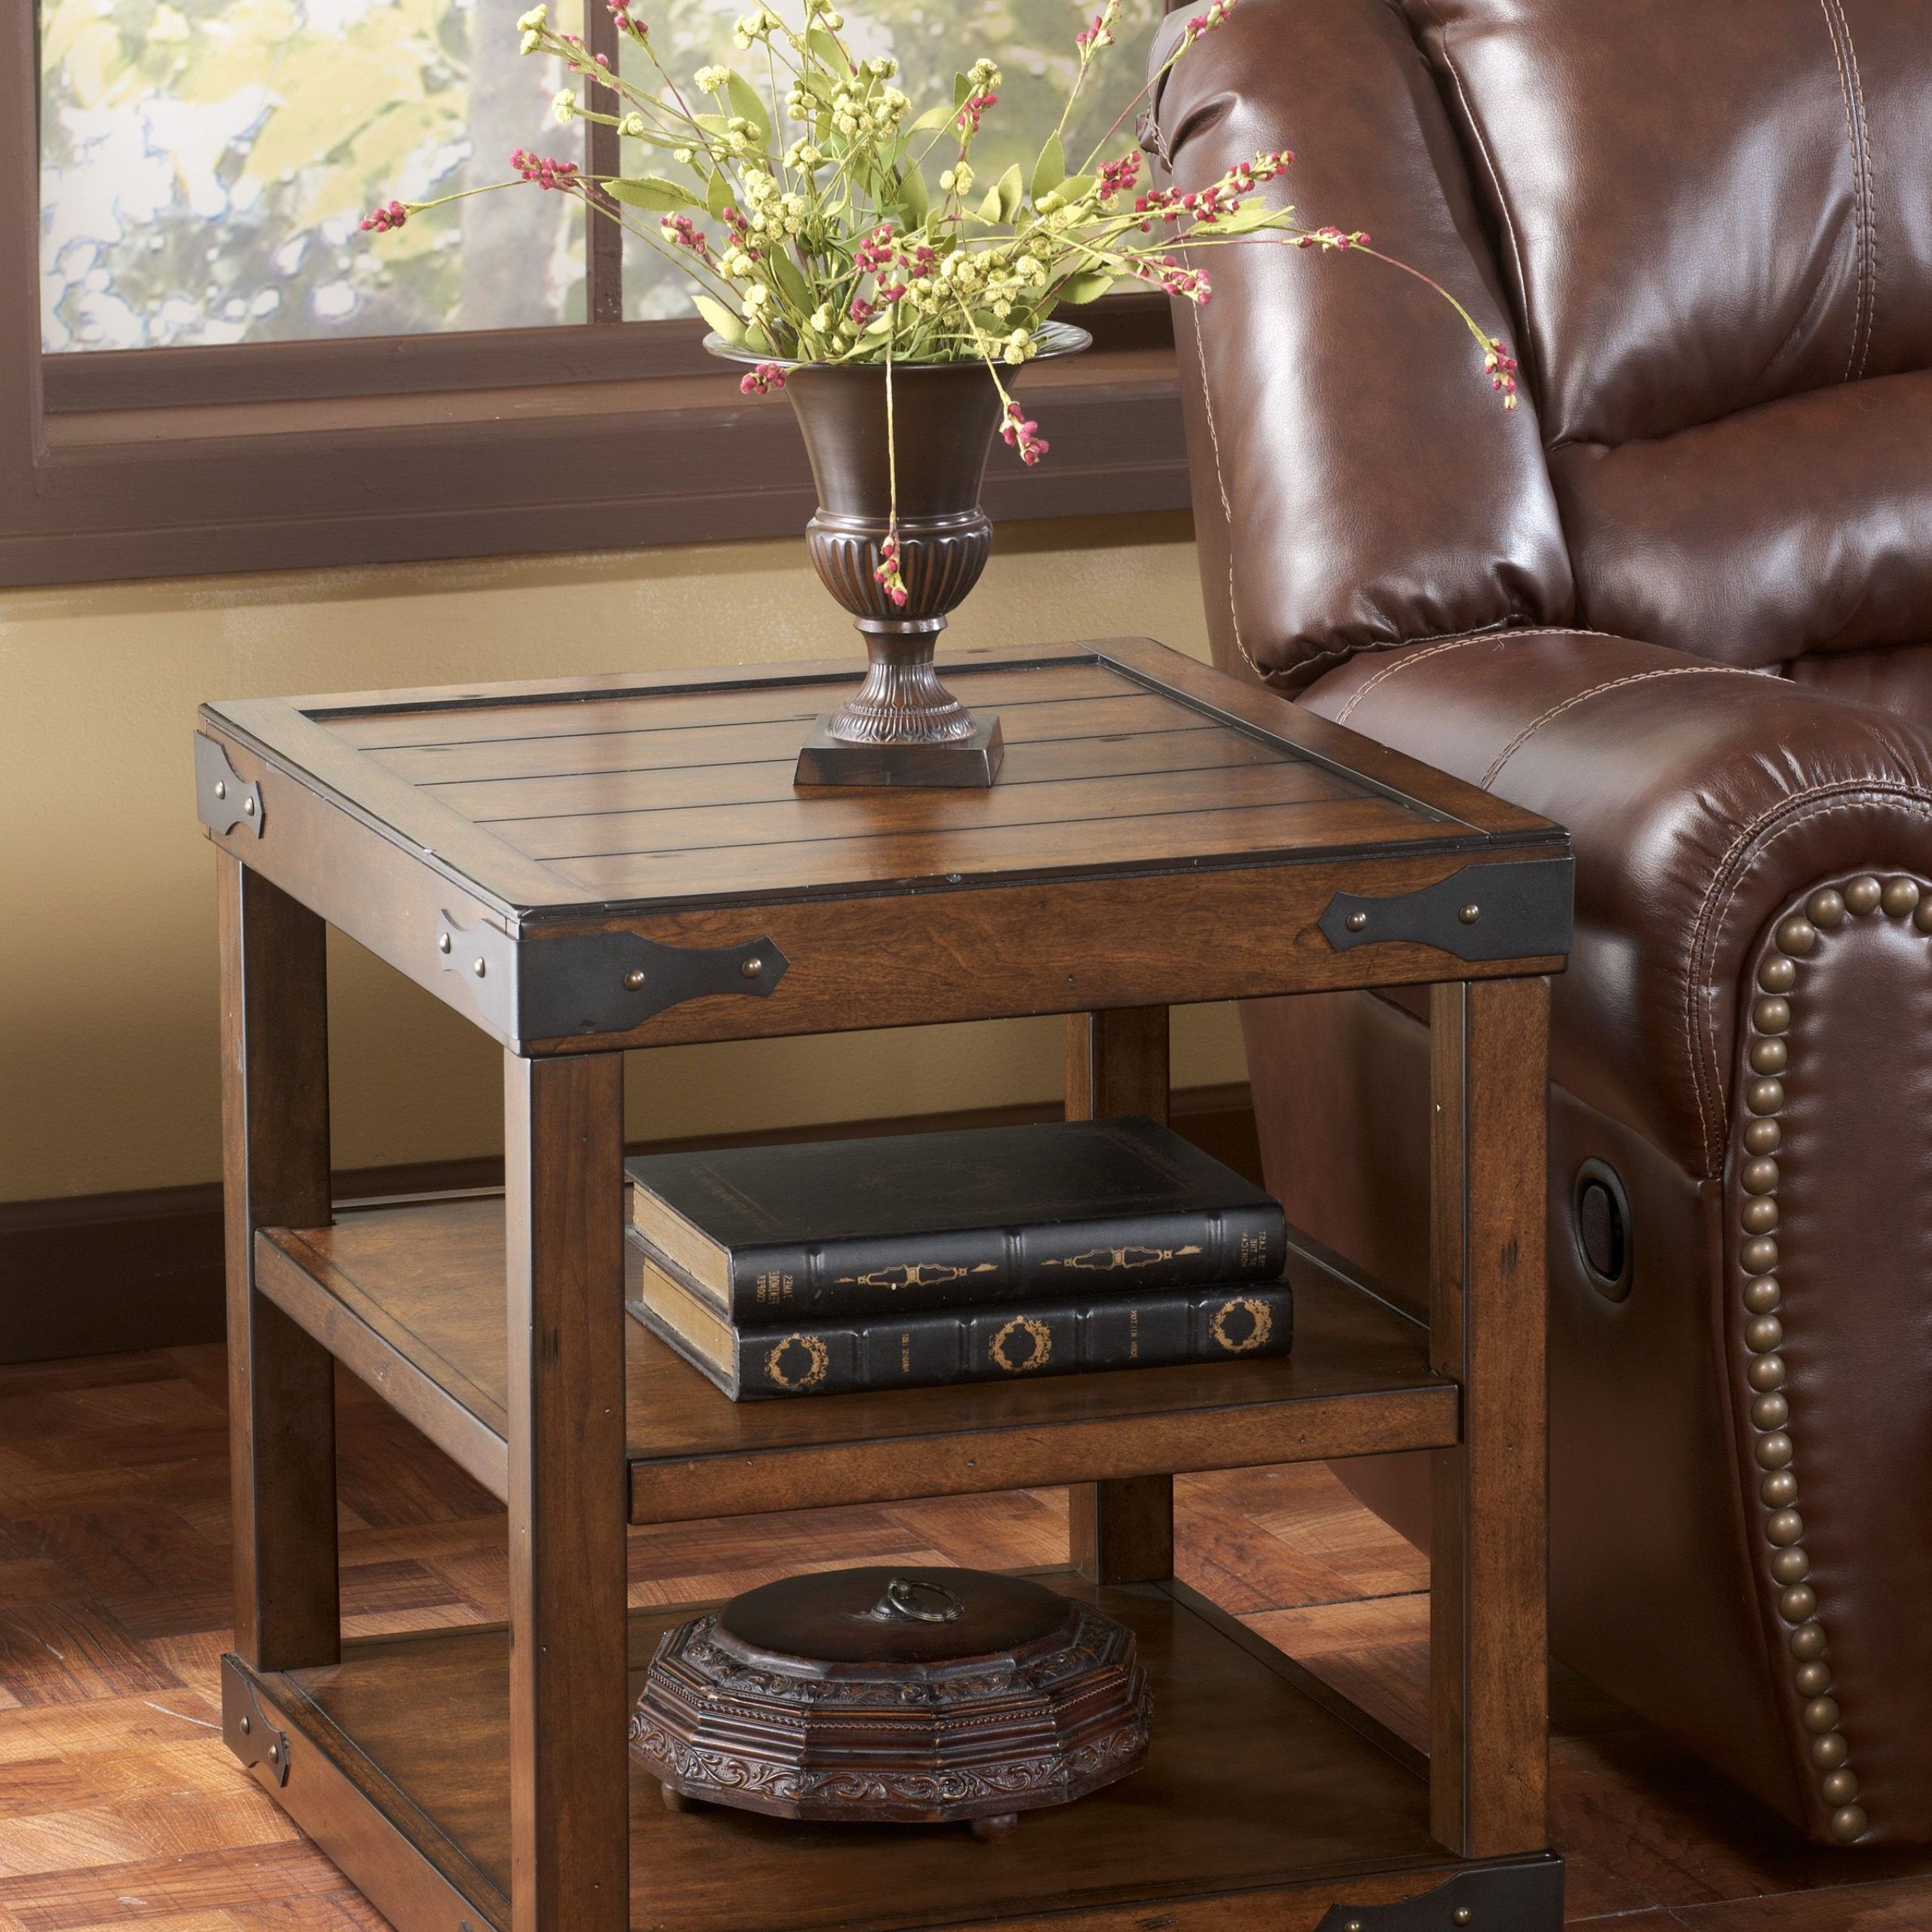 Shepherdsville Traditional Brown Wood Coffee Table Set | Rustic End With Regard To Brown Rustic Coffee Tables (View 16 of 20)